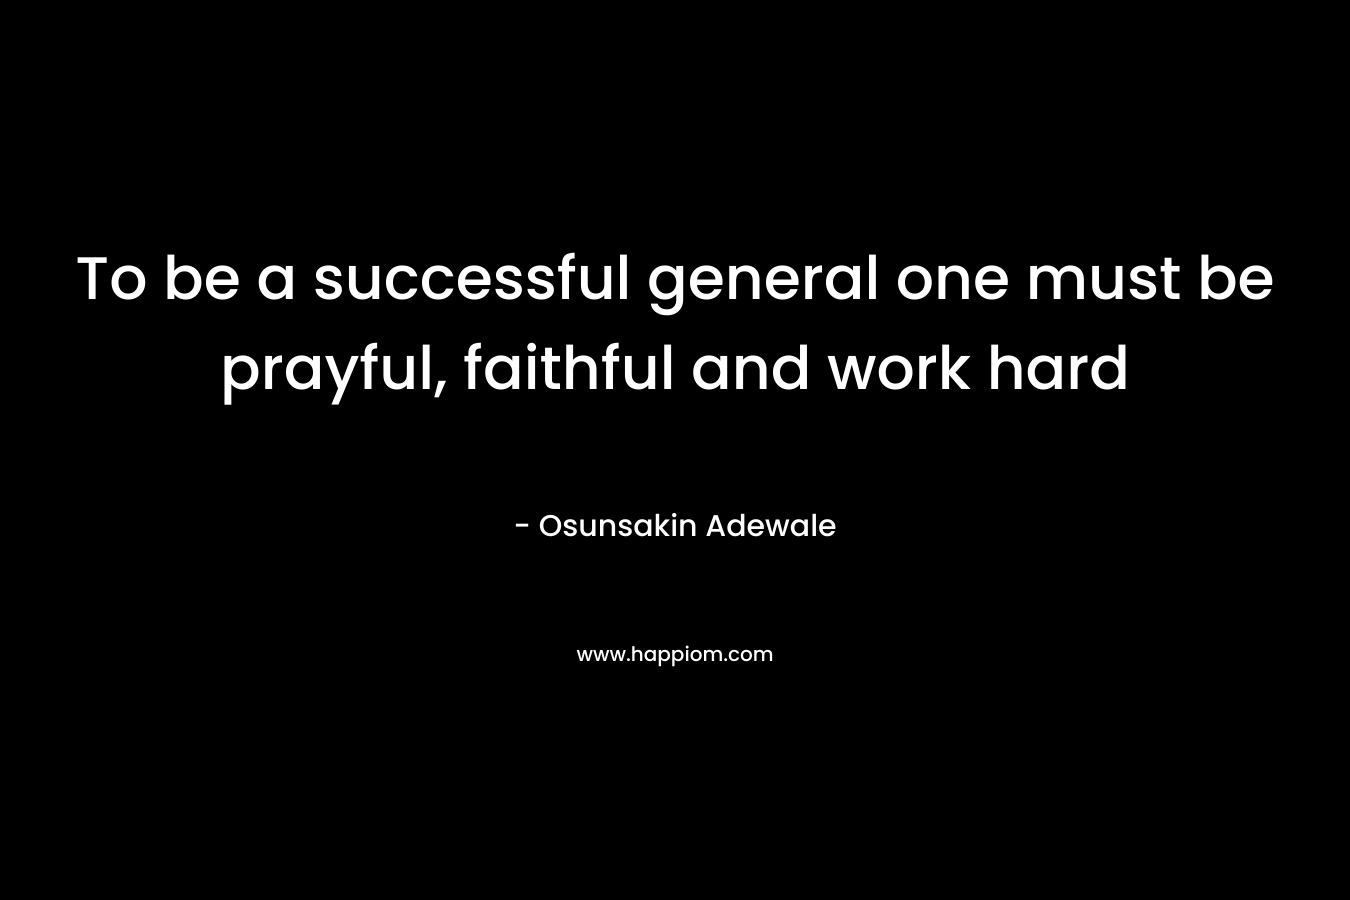 To be a successful general one must be prayful, faithful and work hard